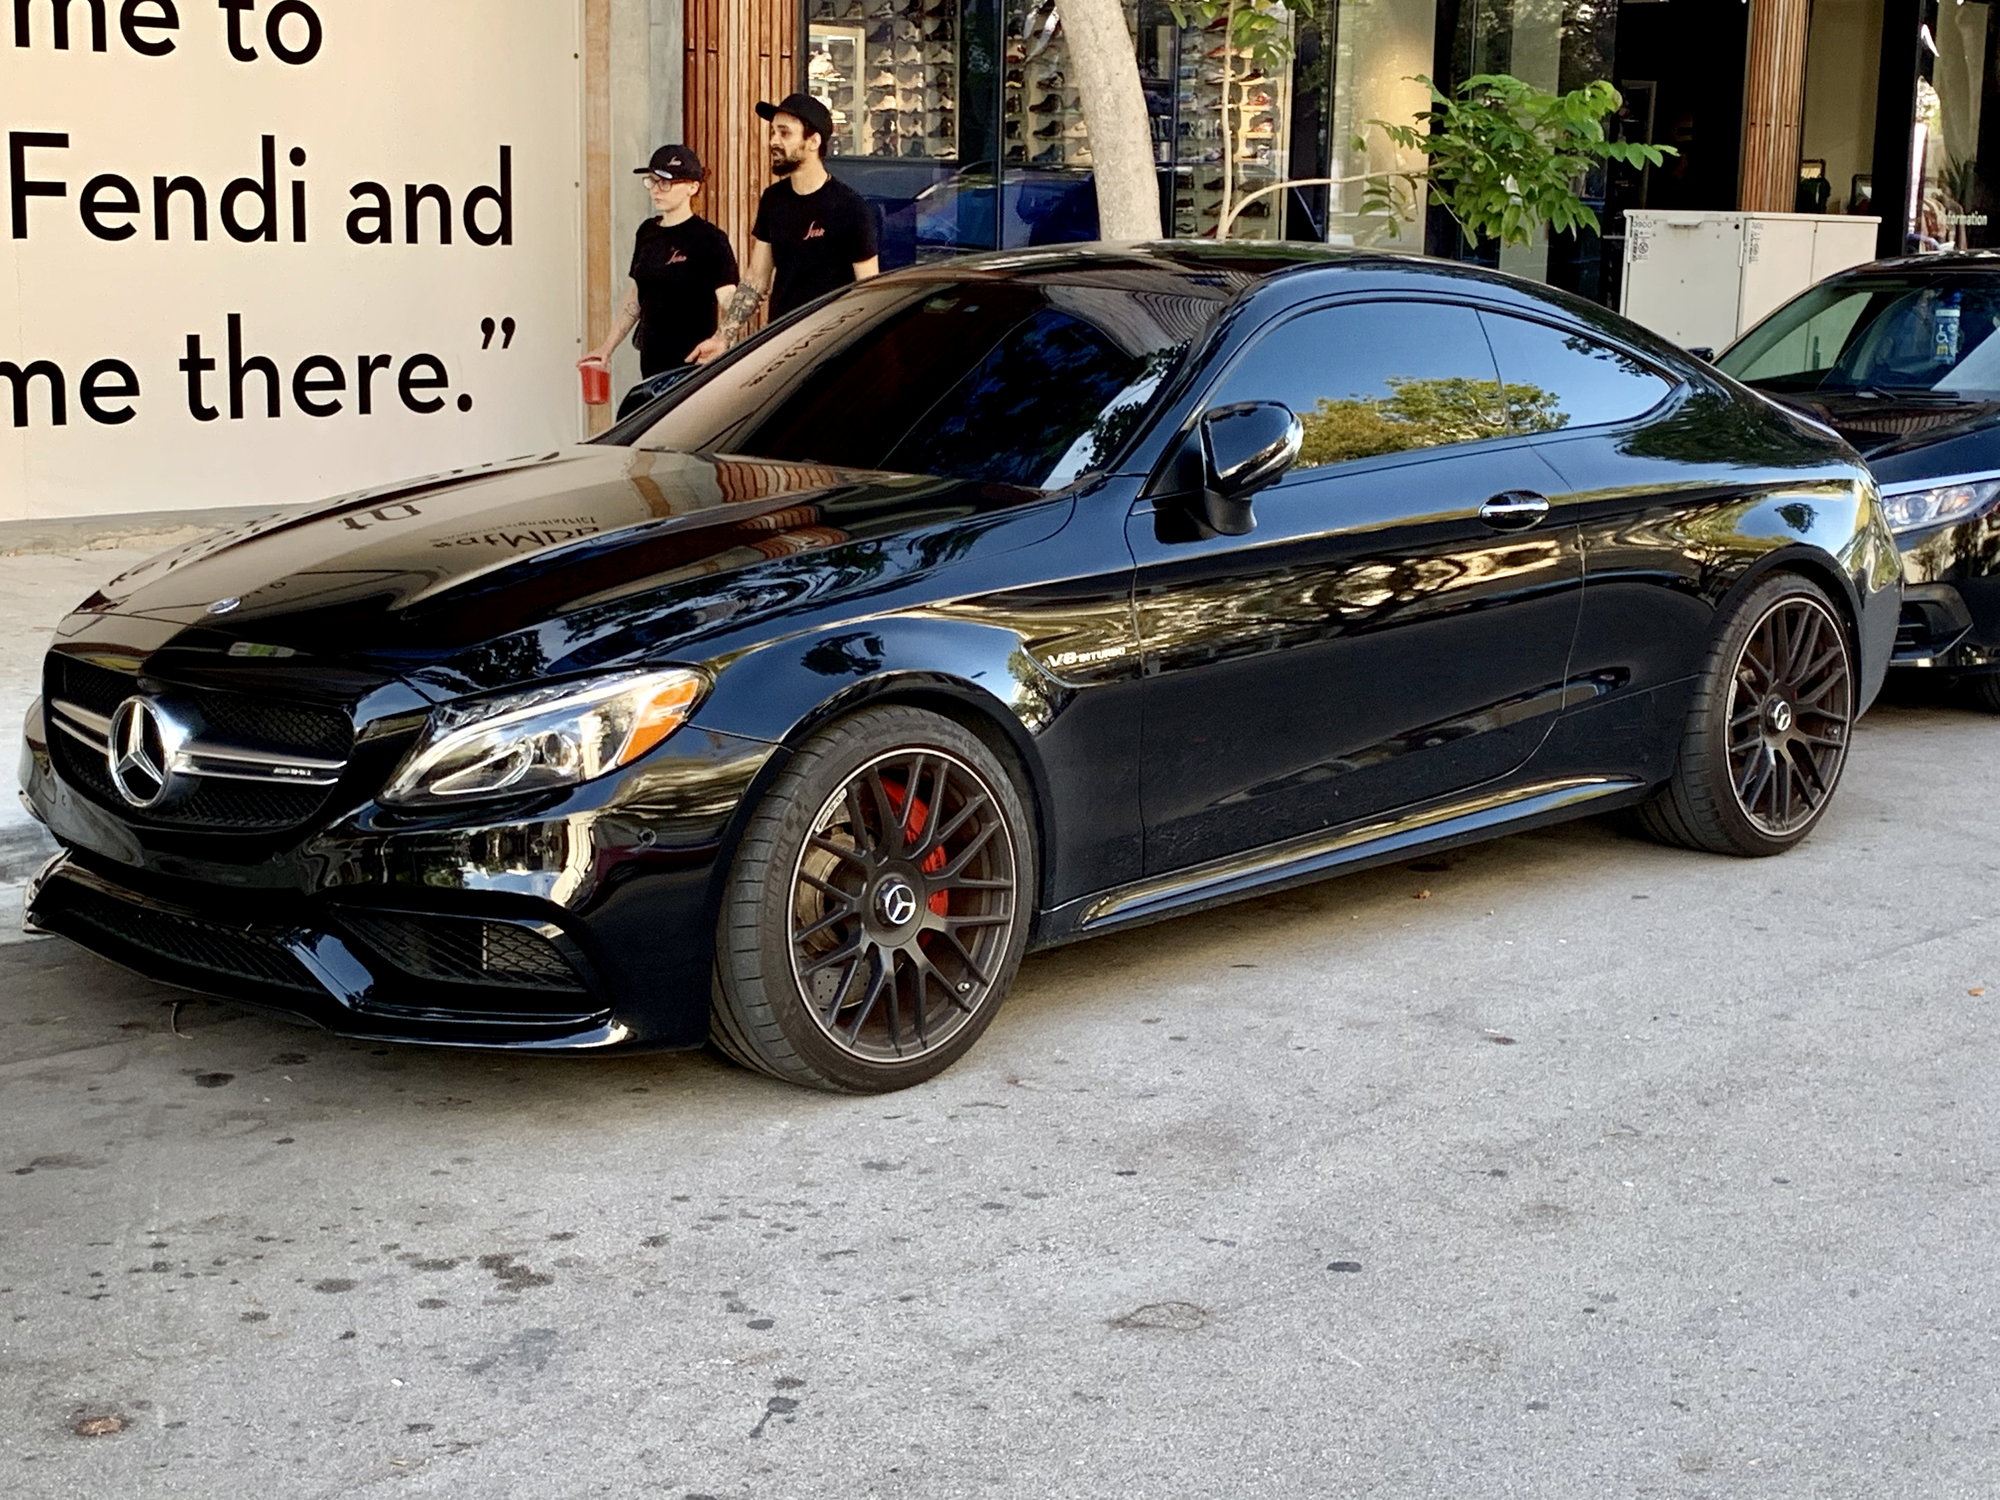 17 Mercedes Black C63 Amg S Coupe Dinan Tuned 609hp 656 Tq For Sale Mbworld Org Forums